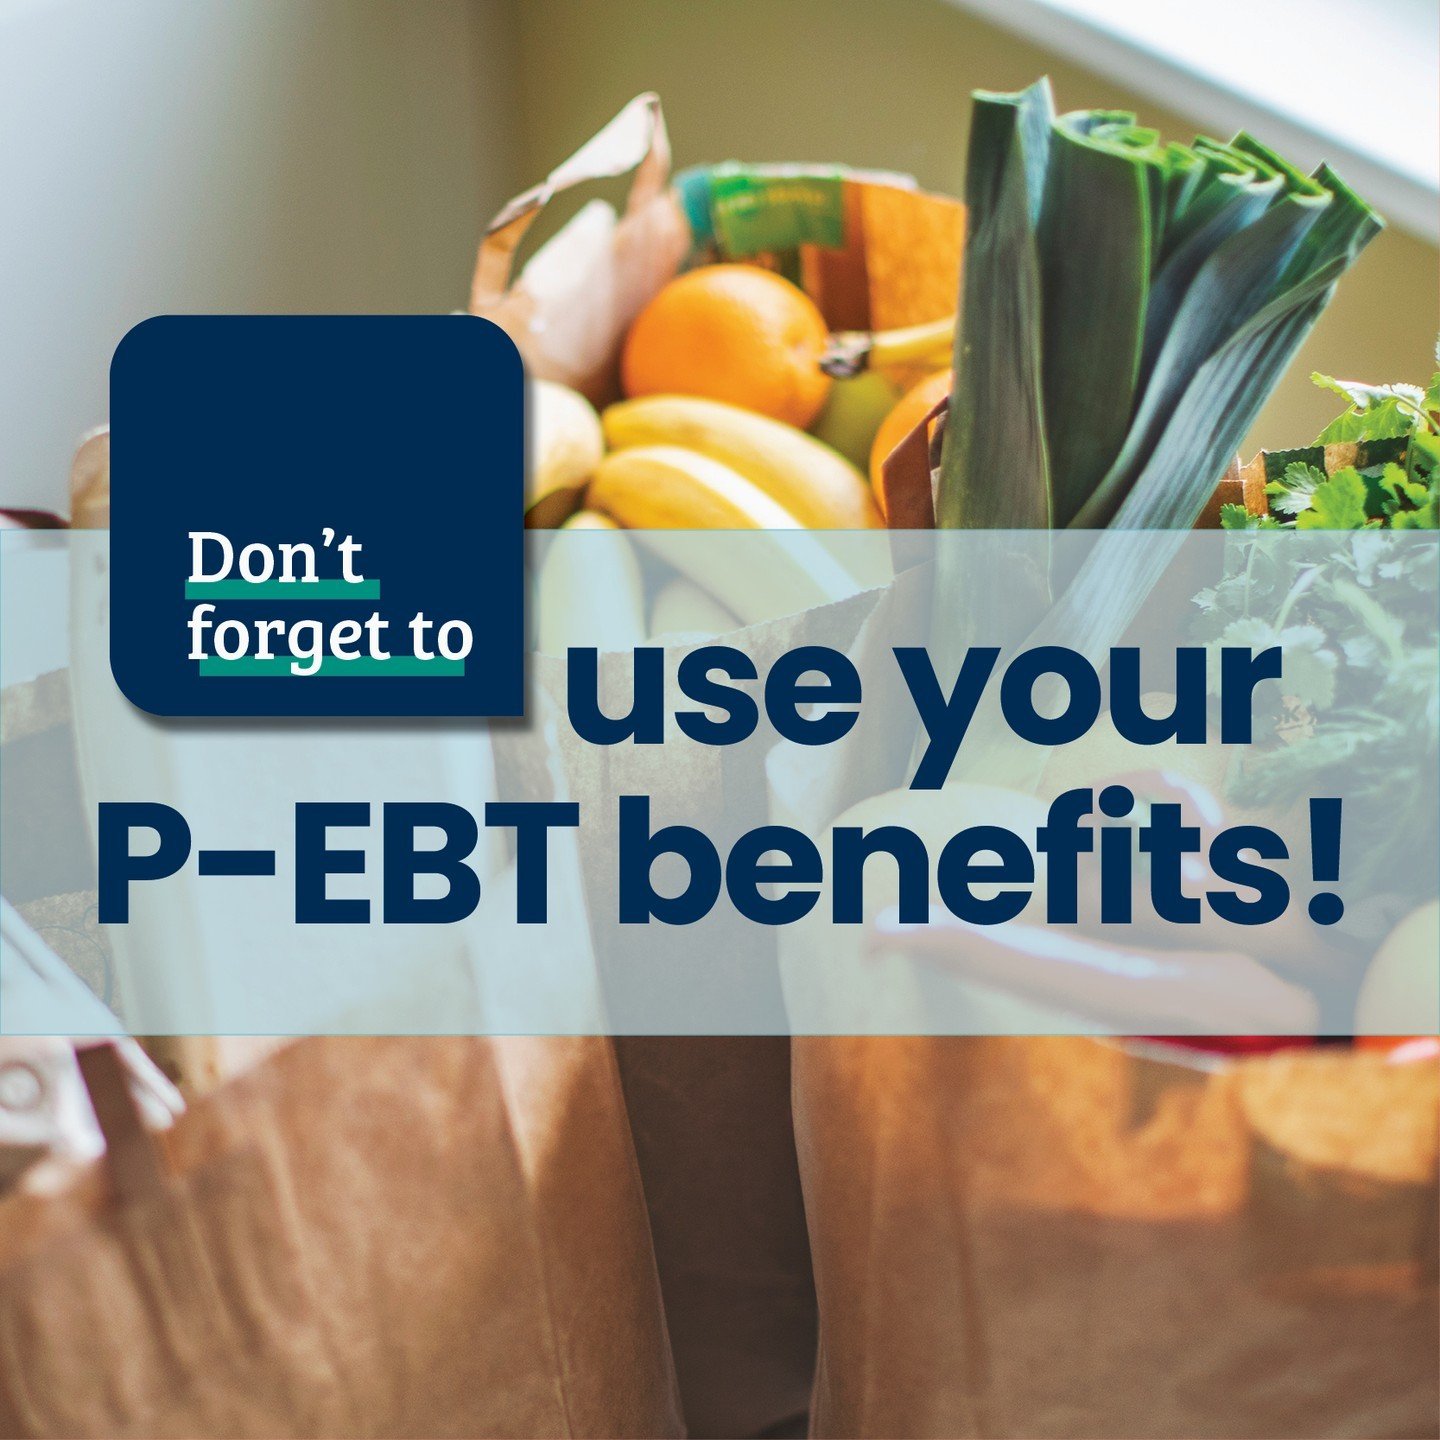 📢 Attention P-EBT recipients! 

When P-EBT benefits are unused for 9 months, they will expire and return to the federal government. So be sure to USE them! With a P-EBT card, you can support our local economy, farmers, and growers, all while saving 